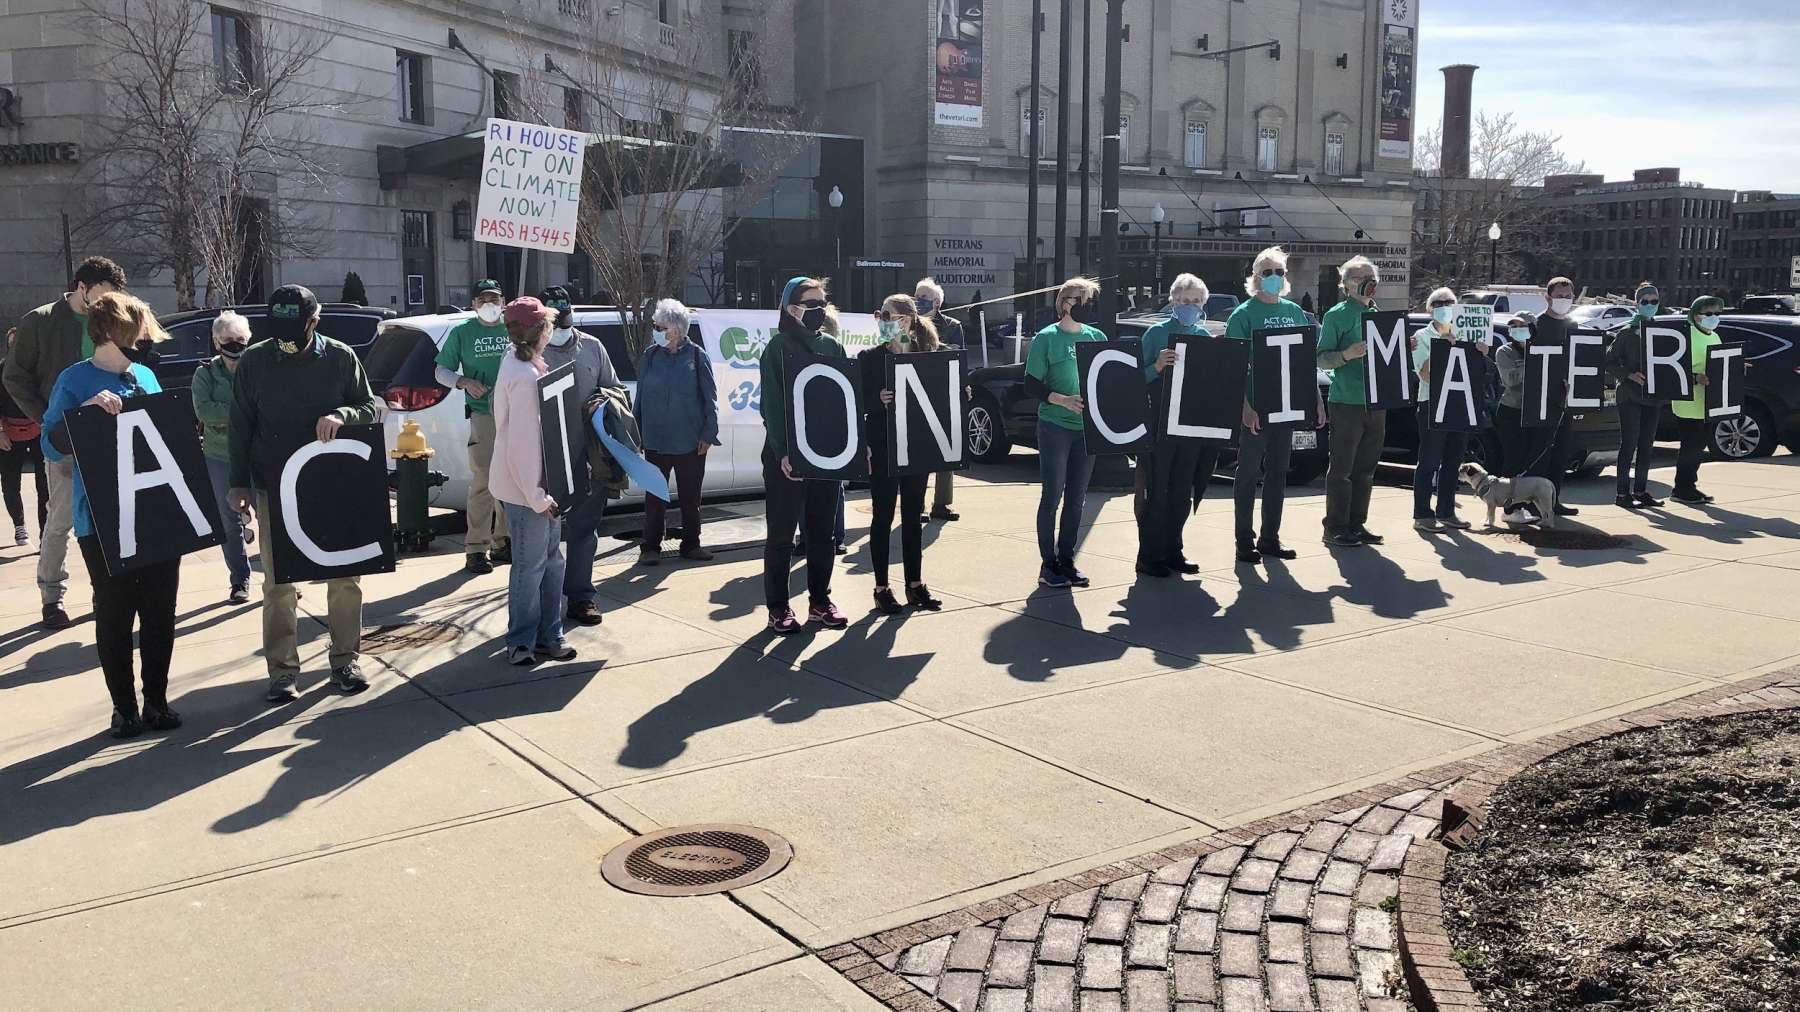 ECRI urges Governor McKee to sign 2021 Act on Climate bill into law – as is